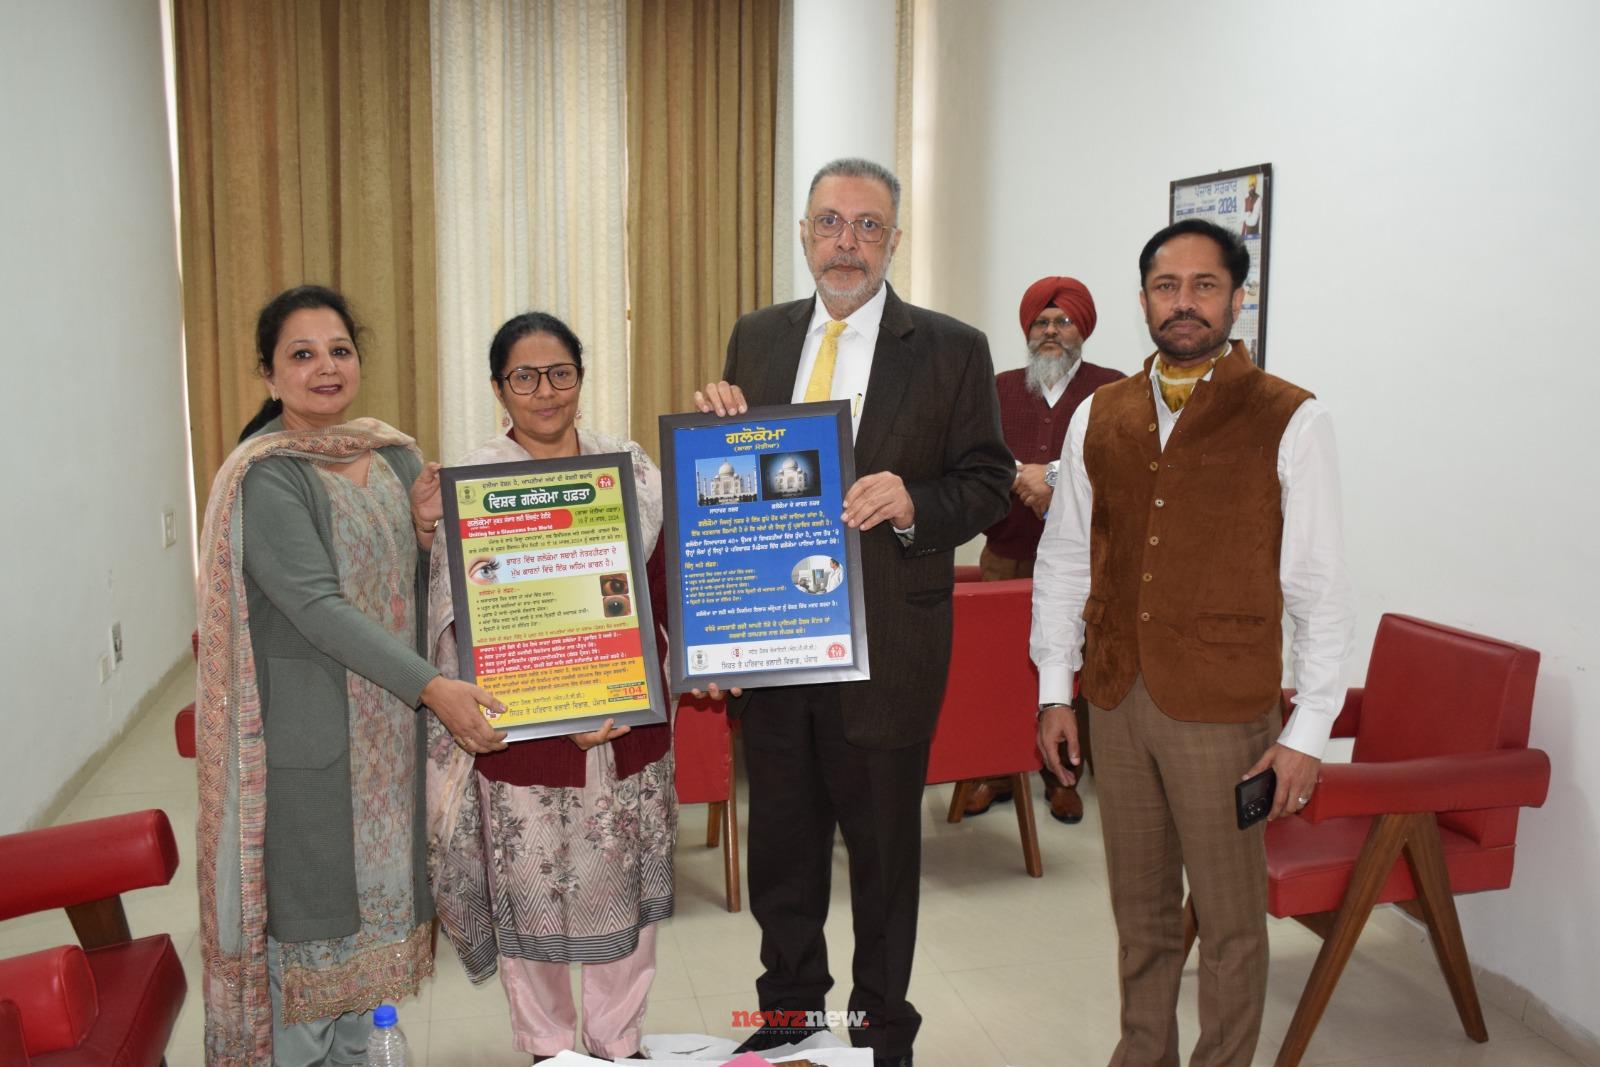 Punjab health department to observe glaucoma week from March 10th health minister releases awareness posters